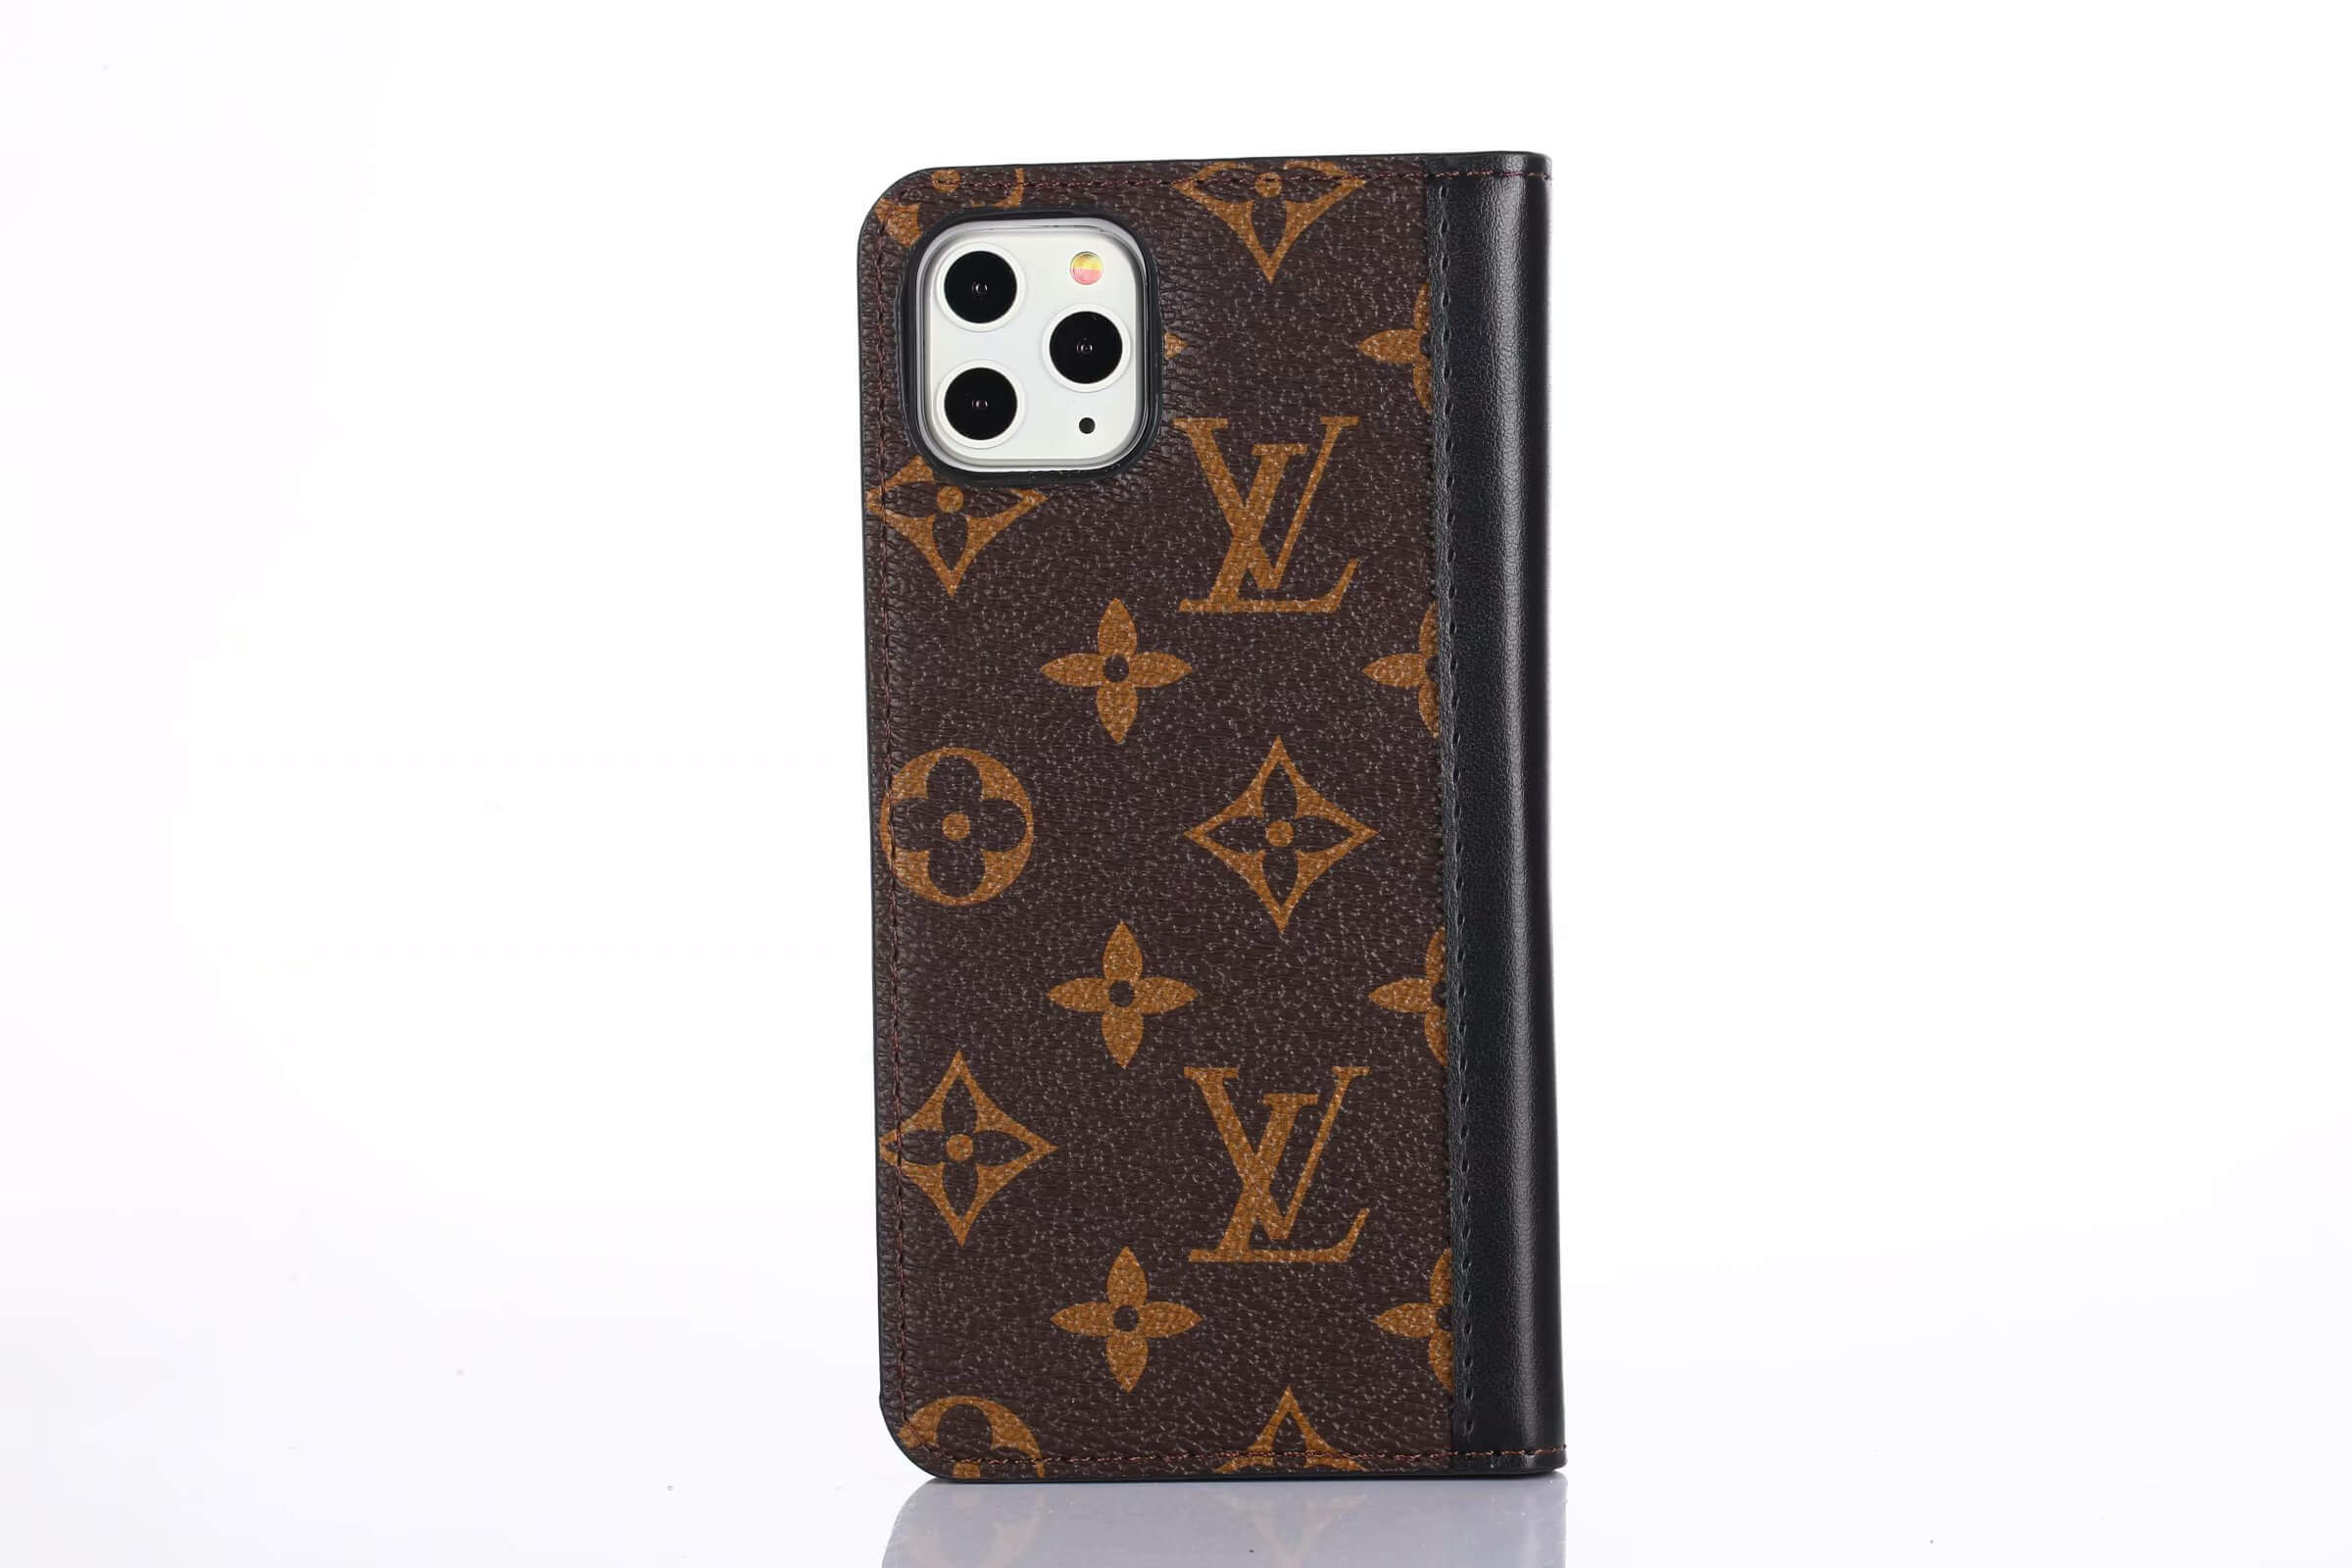 LV LOUIS VUITTON CARD HOLDER PHONE CASE FOR IPHONE 13 12 11 PRO MAX XS MAX  XR XS 7 8 PLUS WITH LA…